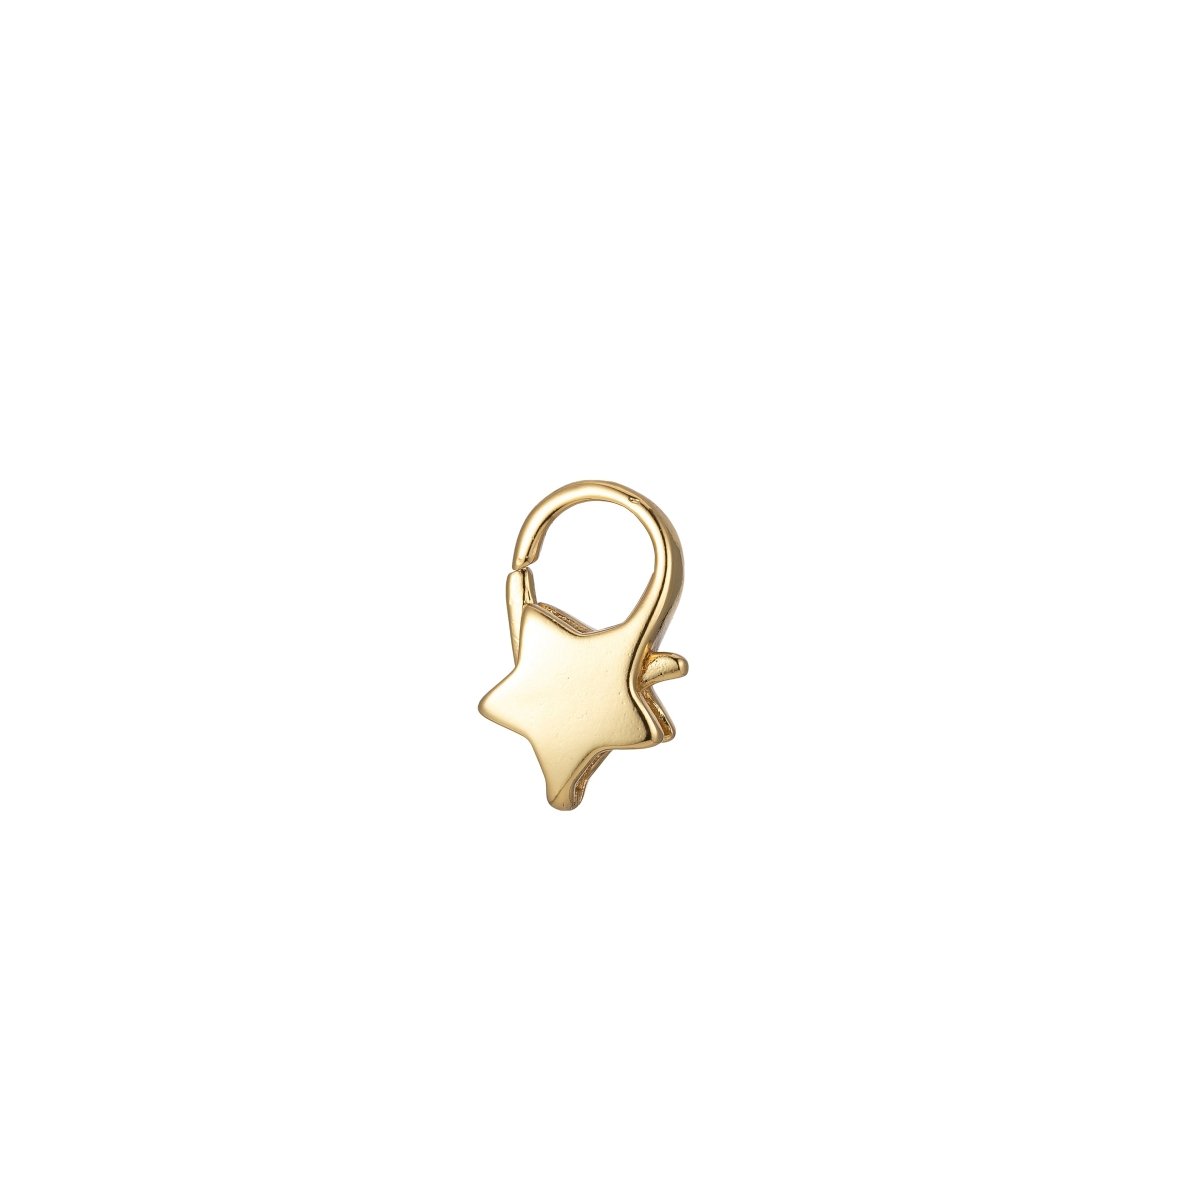 Mini Star Clasp Wholesale Lobster Clasp 24k Gold Filled end Clasp Celestial Lobster Claw for Jewelry Making L-346 L-347 - DLUXCA